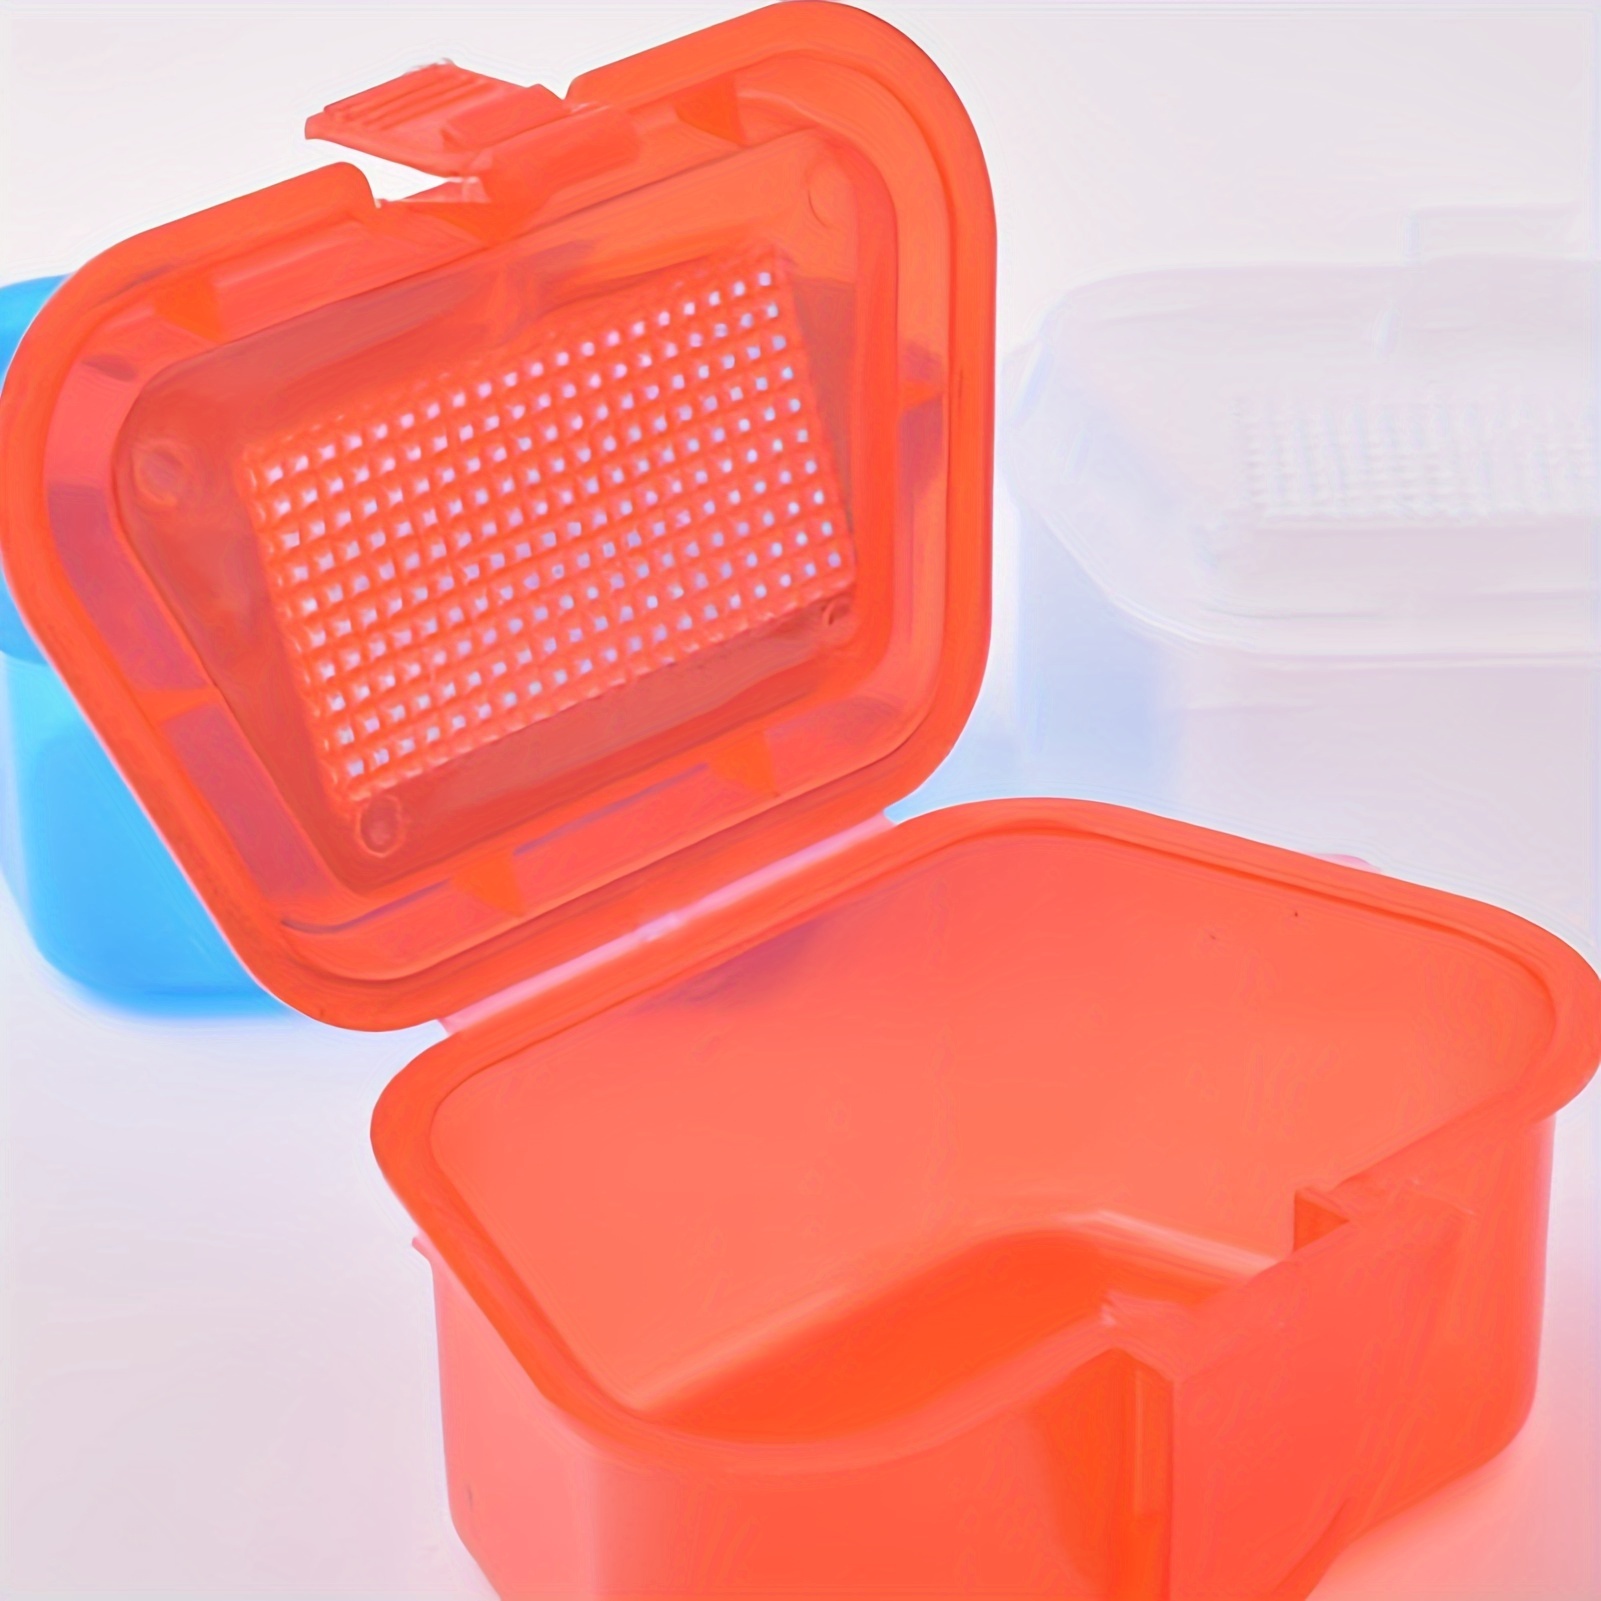 Worm Container Fishing Bait Box Lure Case Red Worm Baits Boxes 10*6.5*6.2cm  Multifunctional Fishing Tackle Boxes